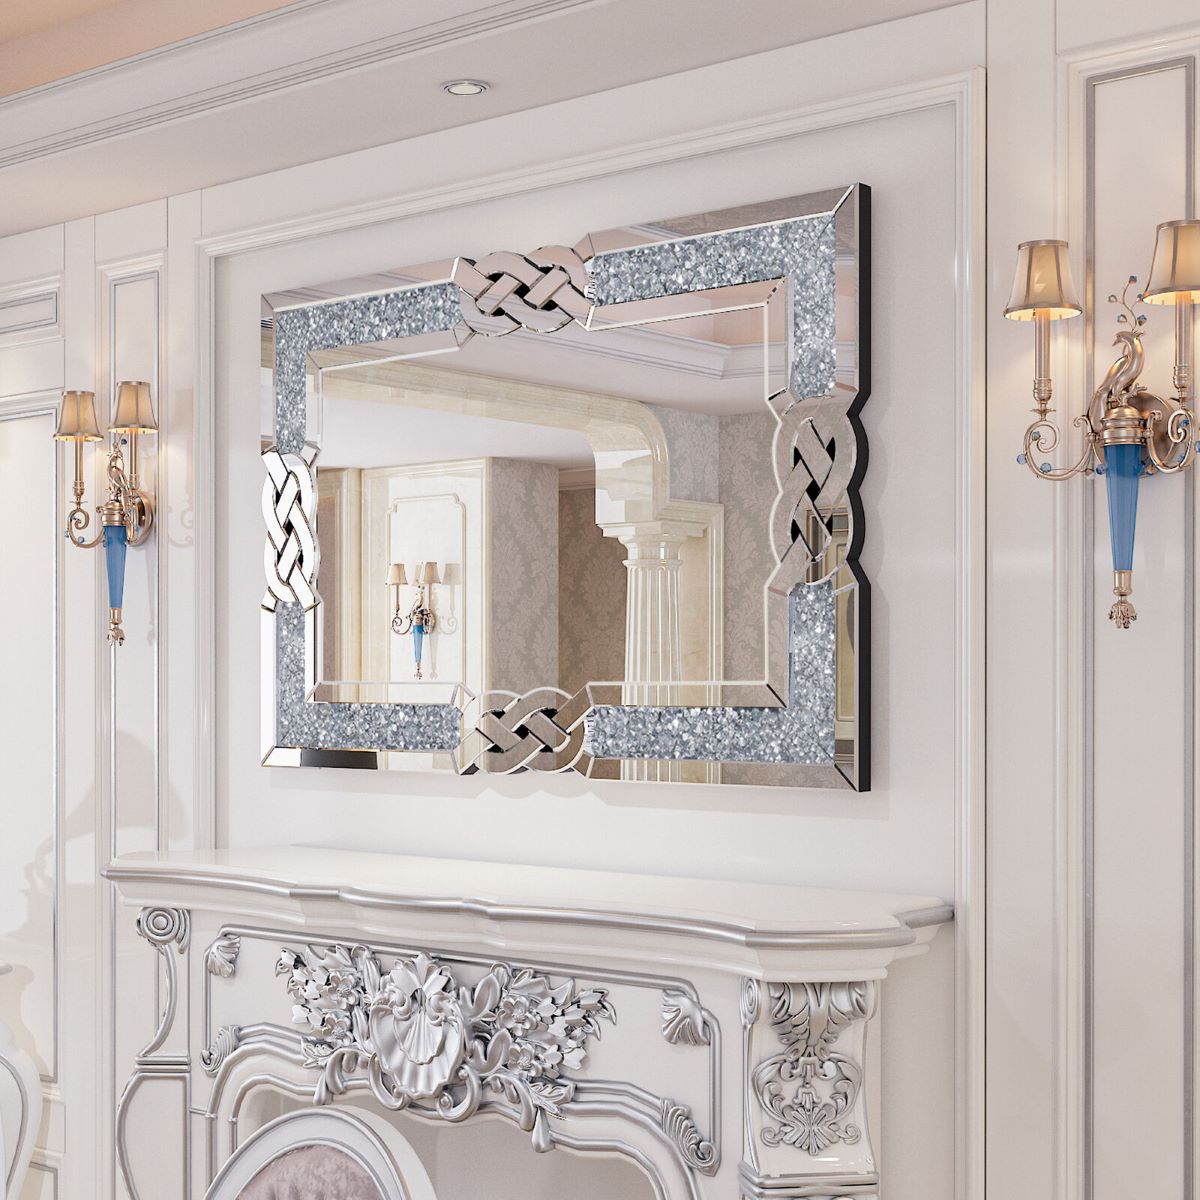 9 Unbelievable Large Decorative Wall Mirrors For 2023 1697554250 